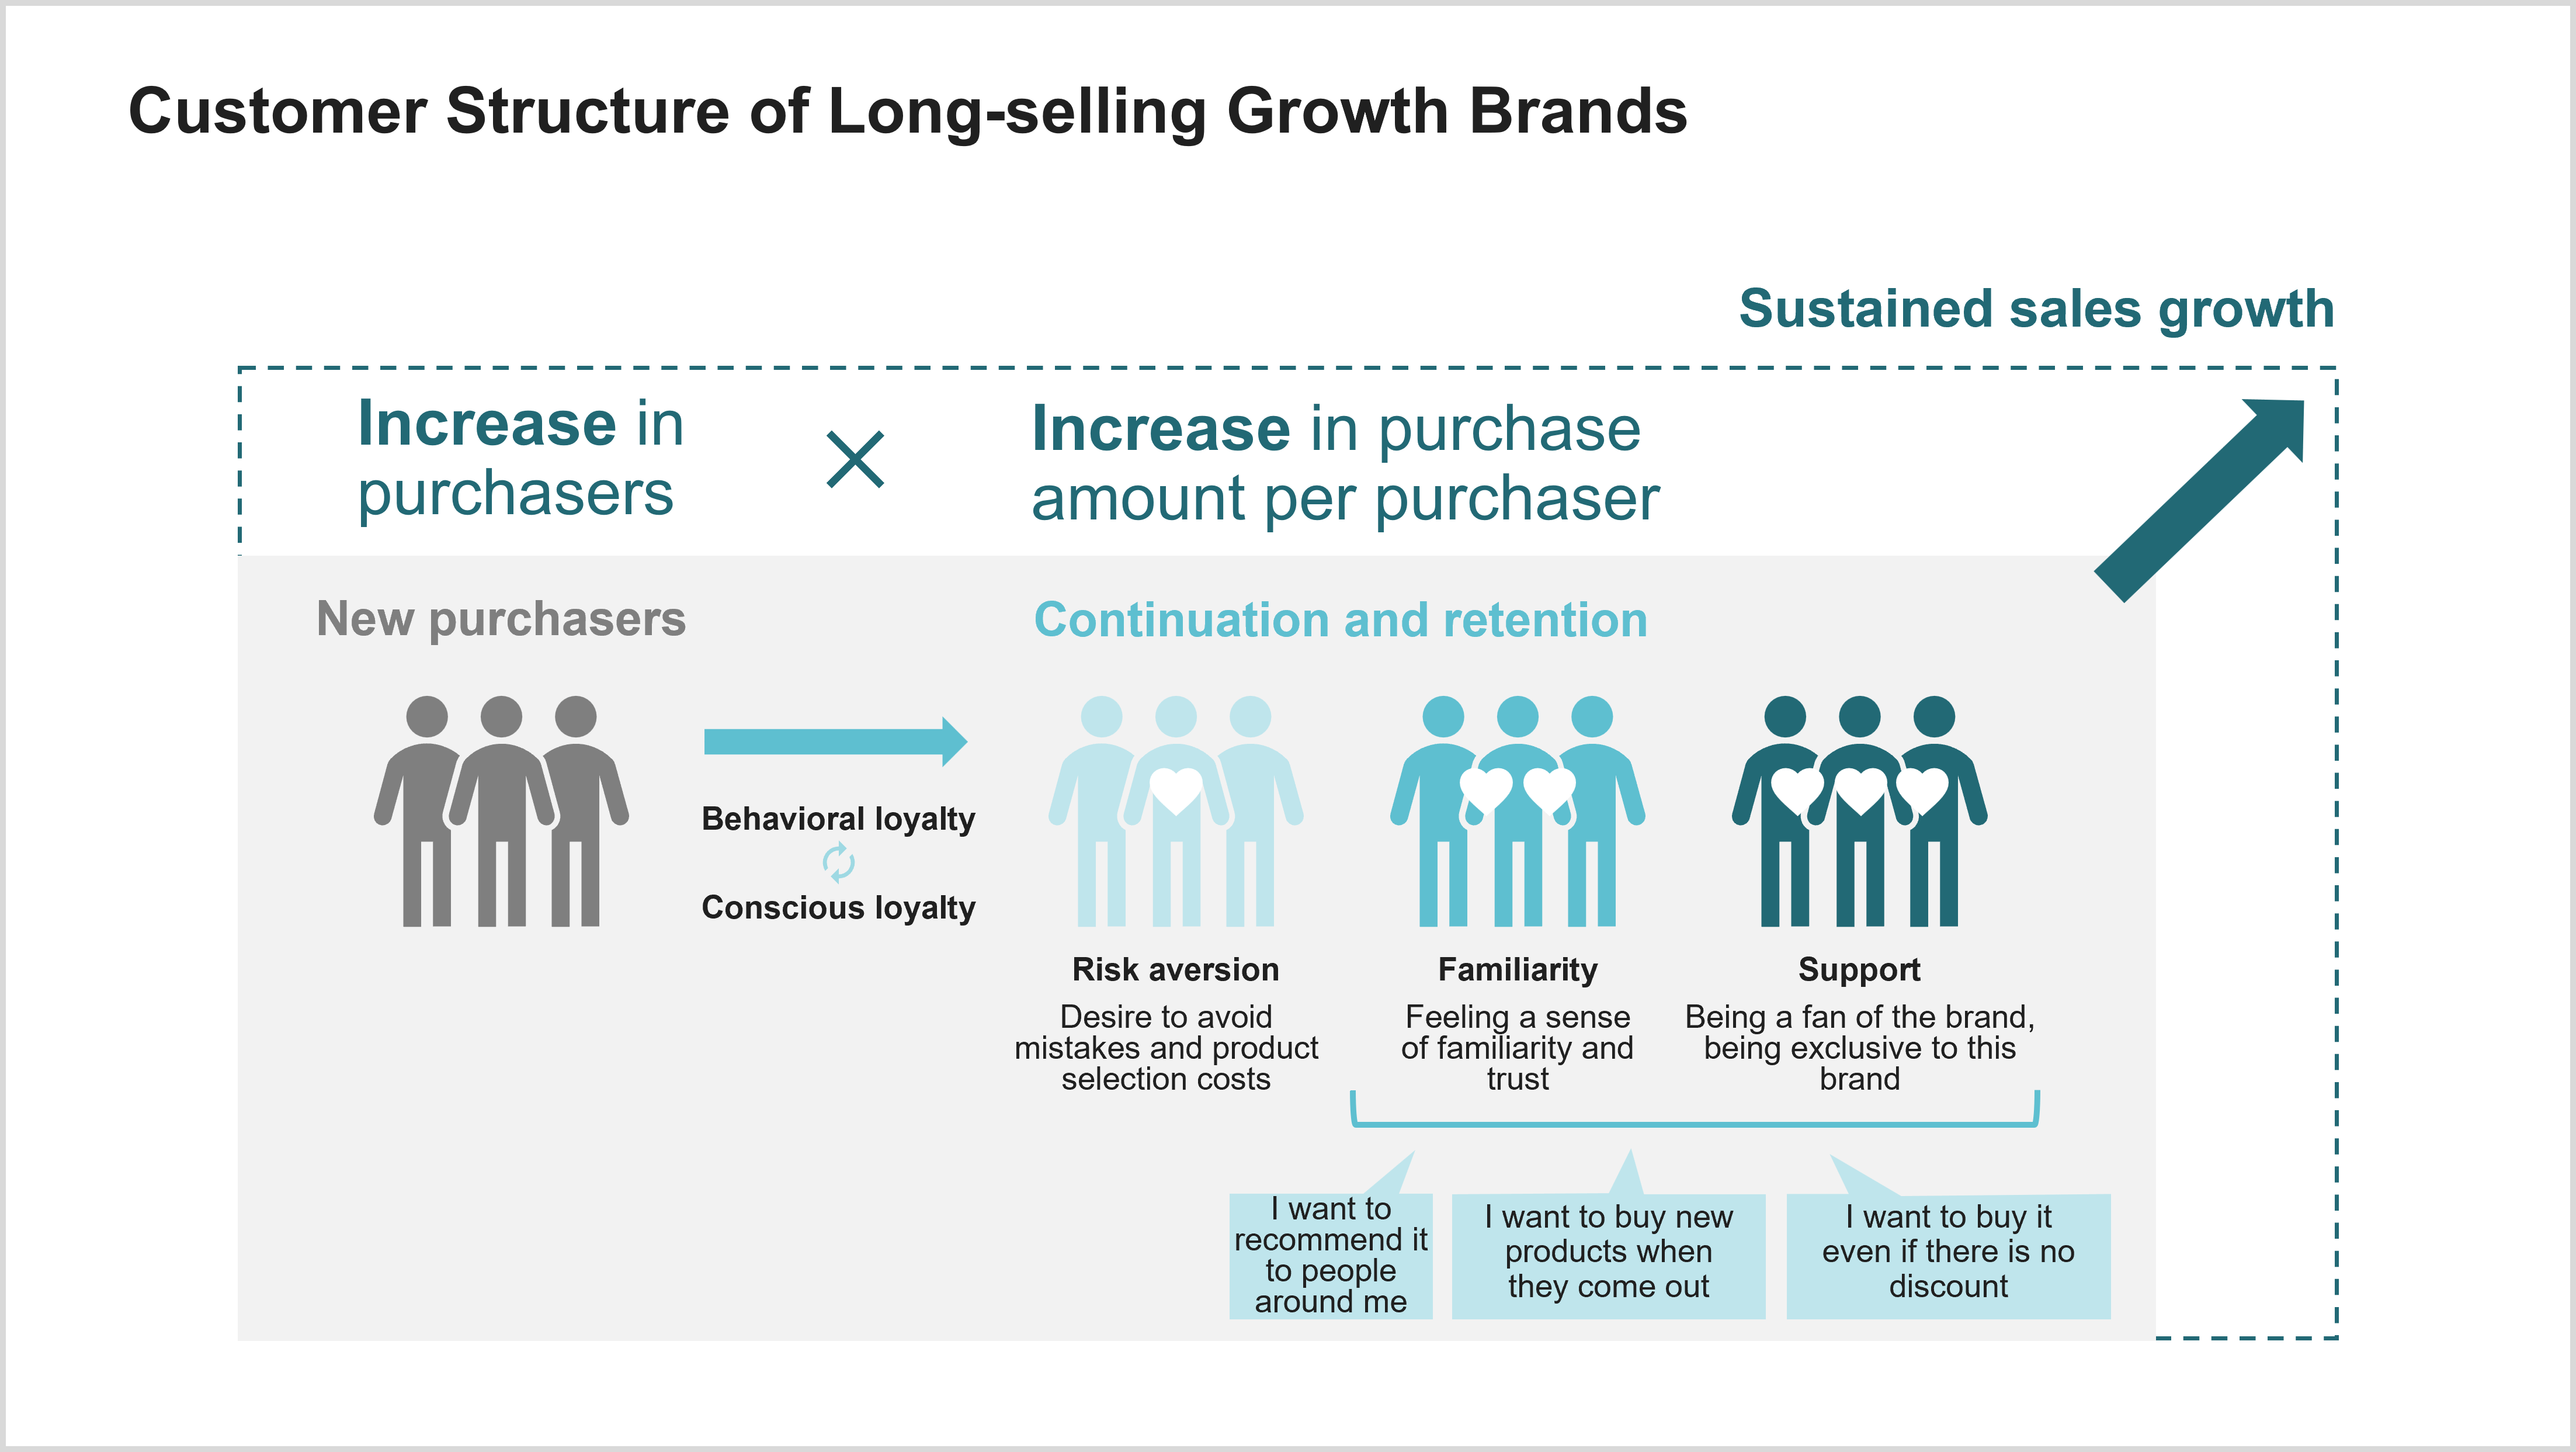 Customer Stucture of Long-selling Growth Brands